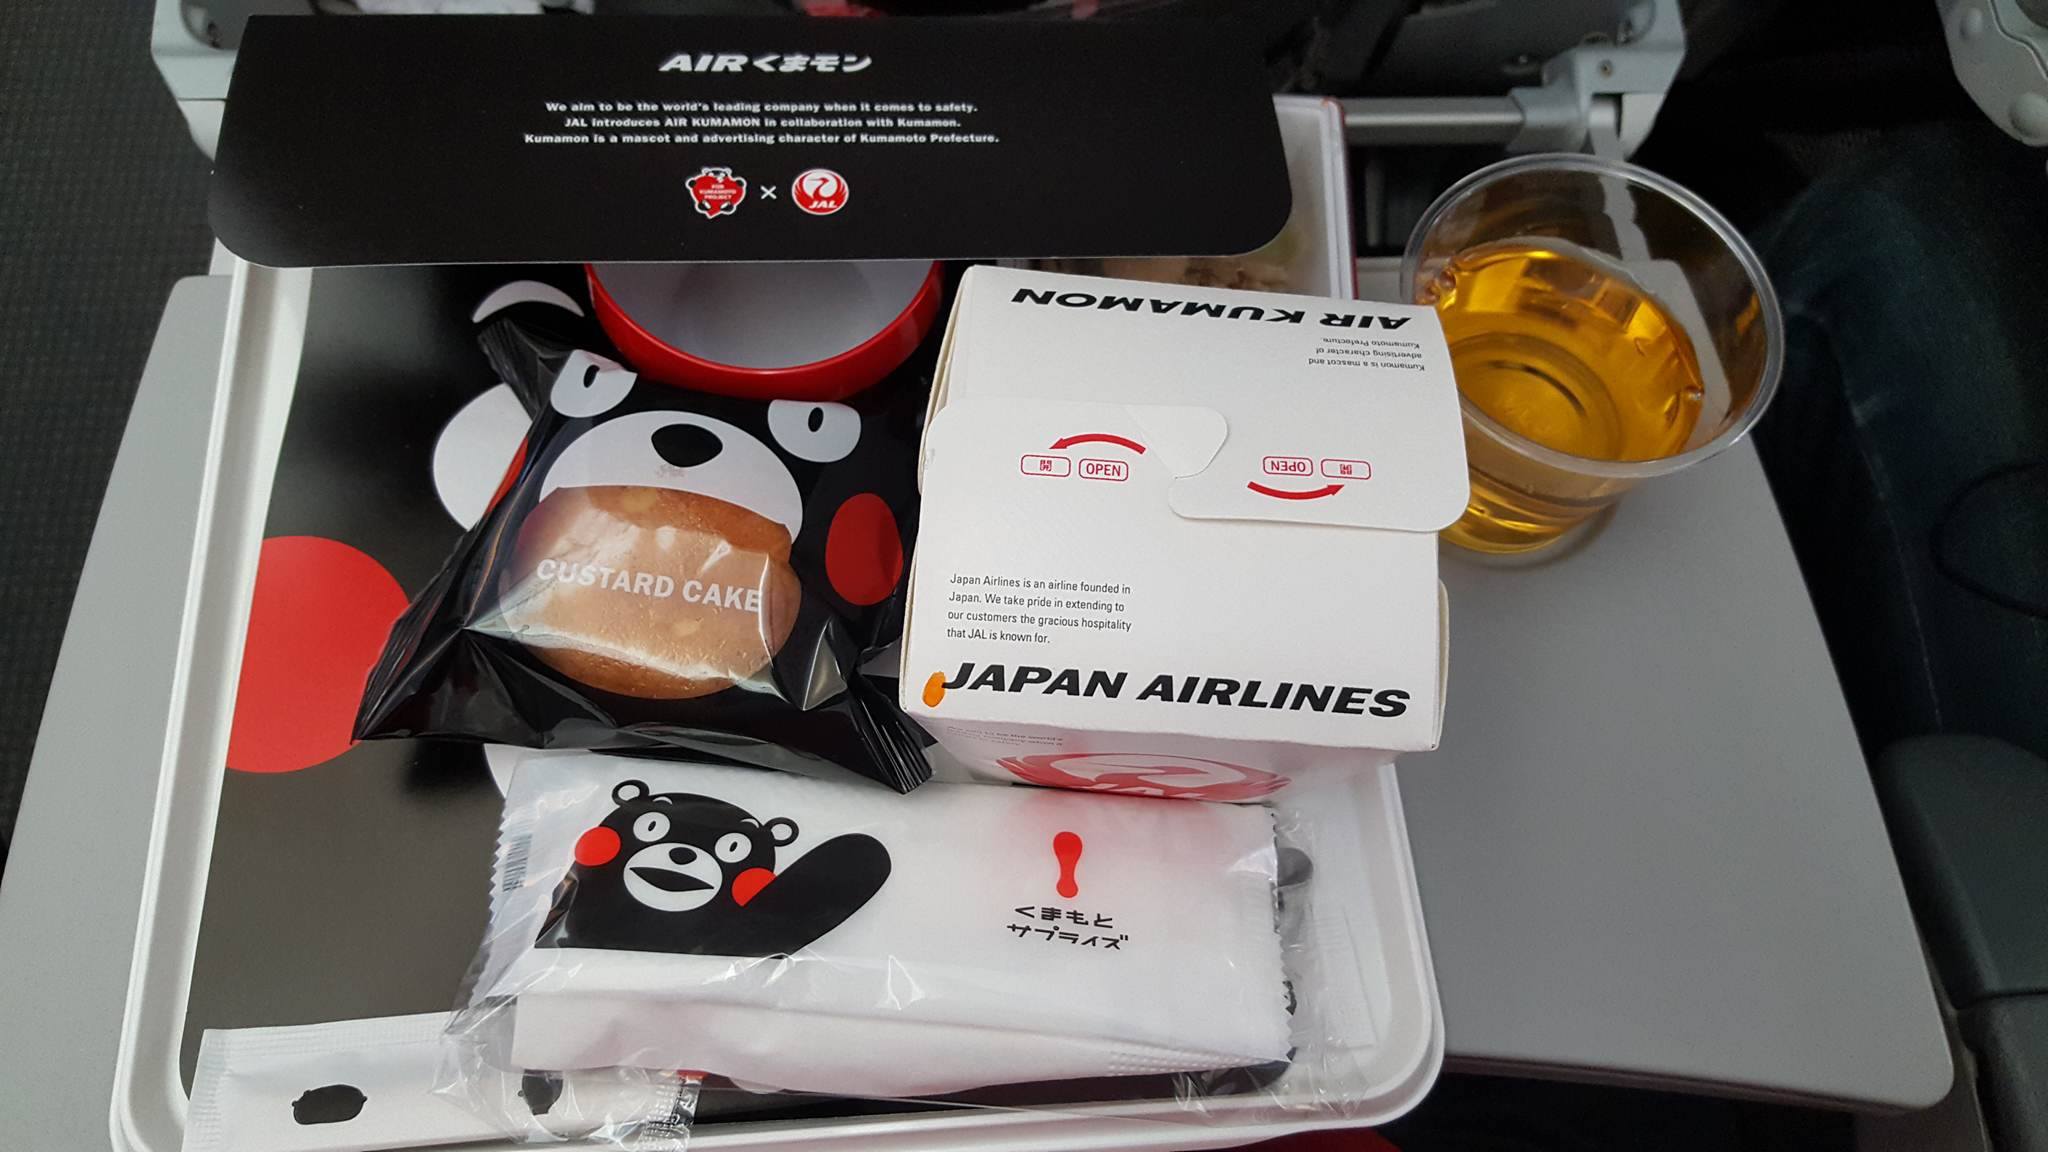 Kuma-mon-mon breakfast! What an adorable meal right before landing in America! It was super delicious too.